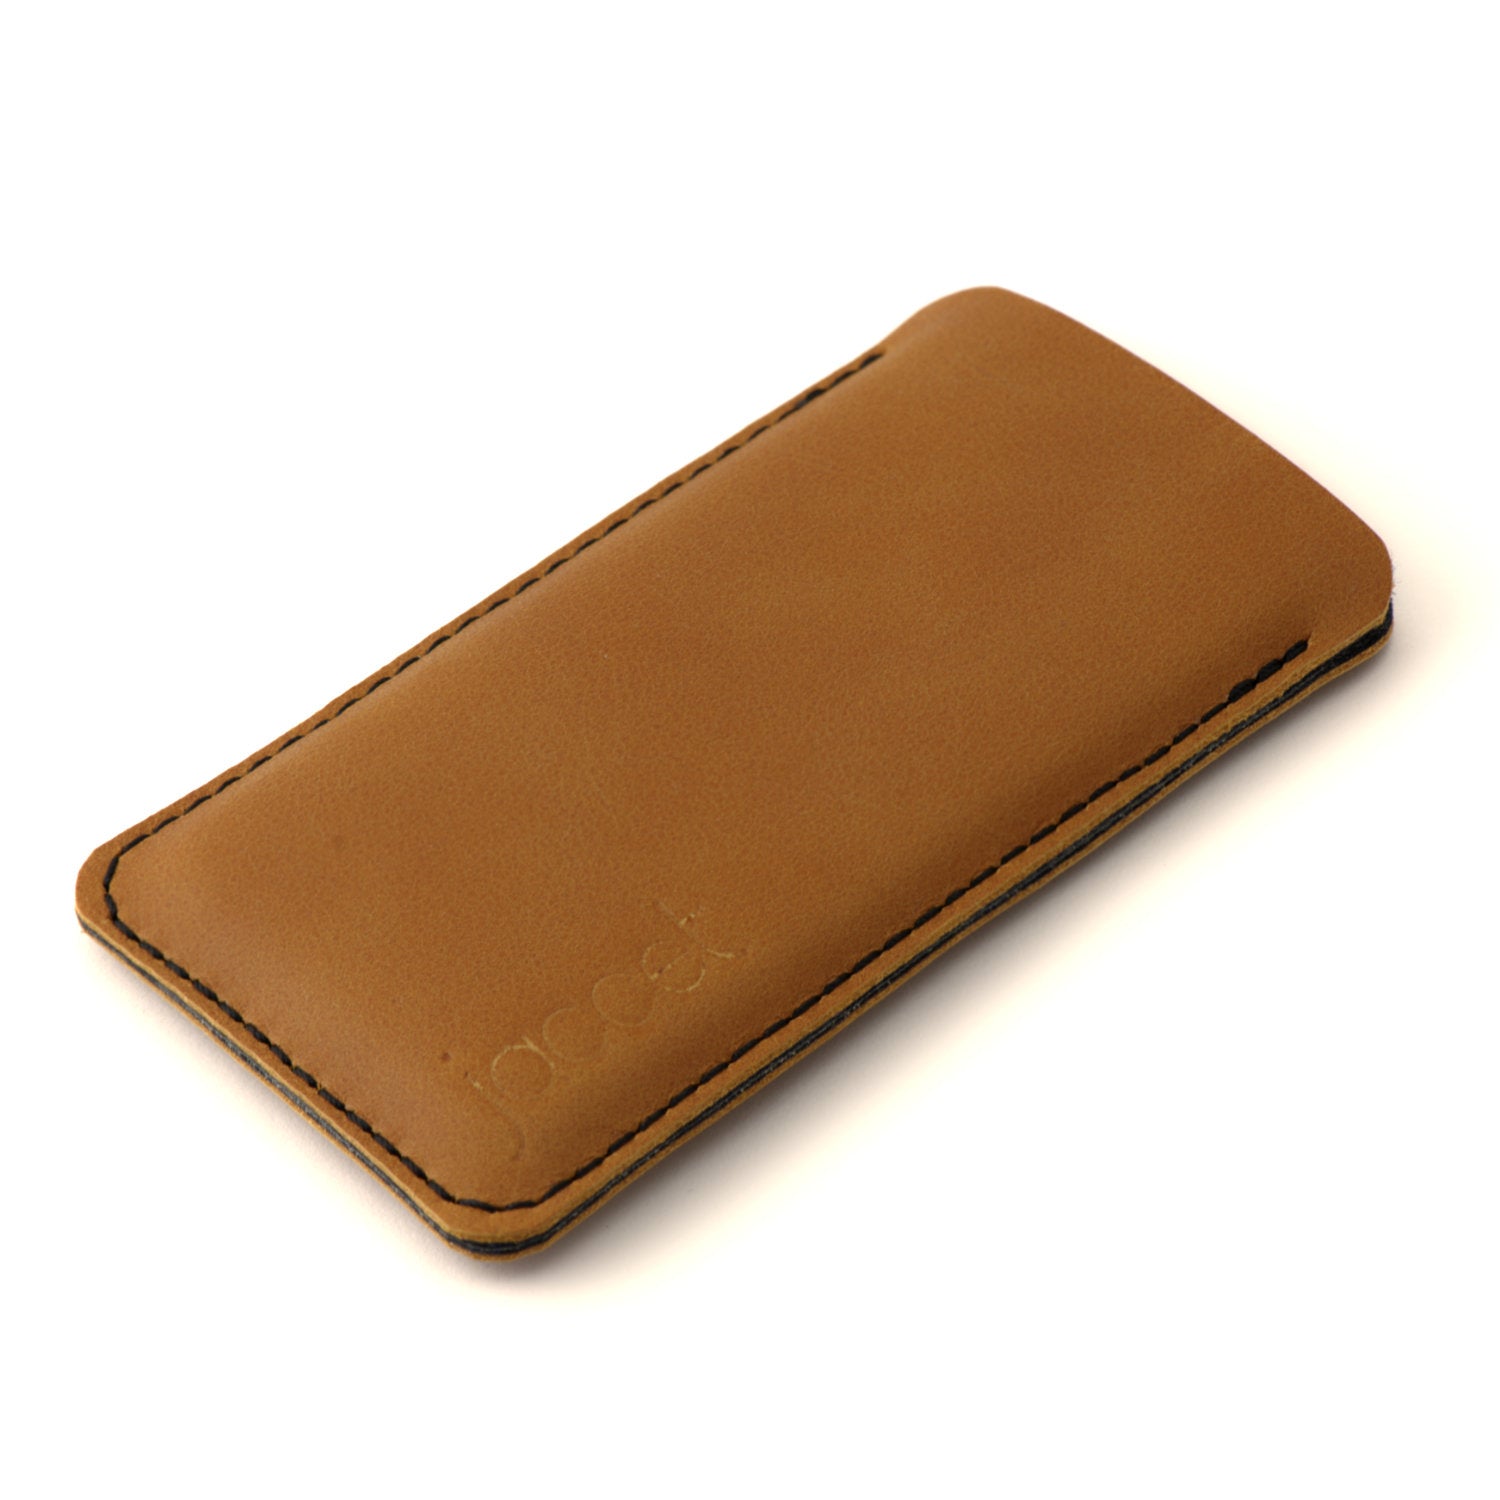 JACCET leather Xiaomi sleeve - Cognac color leather with black wool felt - 100% Handmade